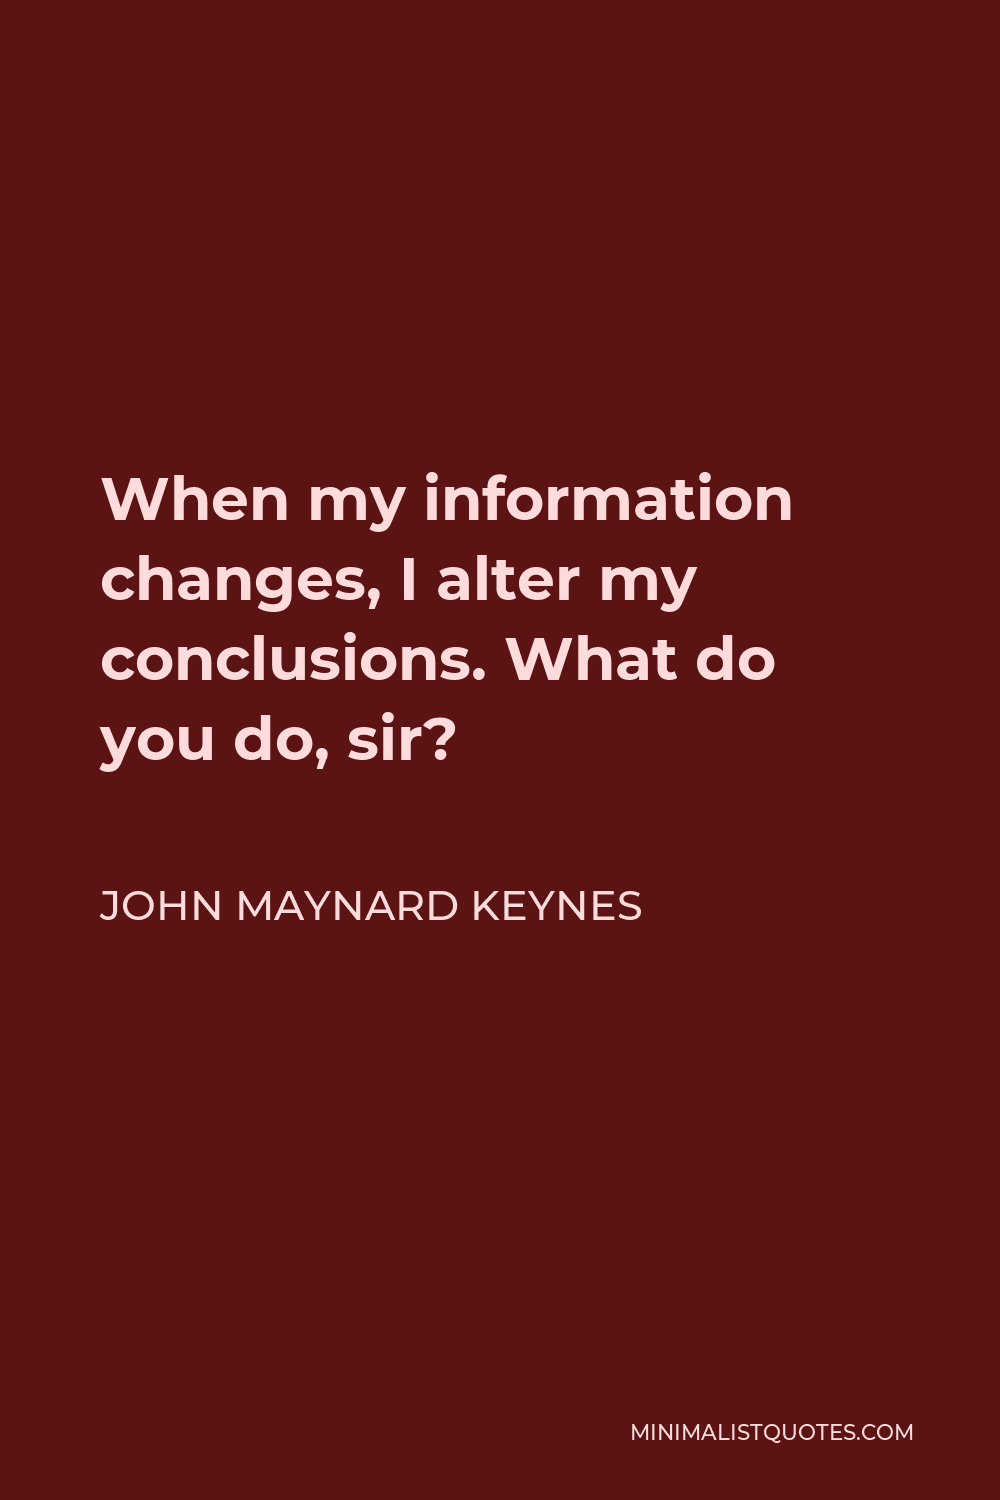 John Maynard Keynes Quote - When my information changes, I alter my conclusions. What do you do, sir?